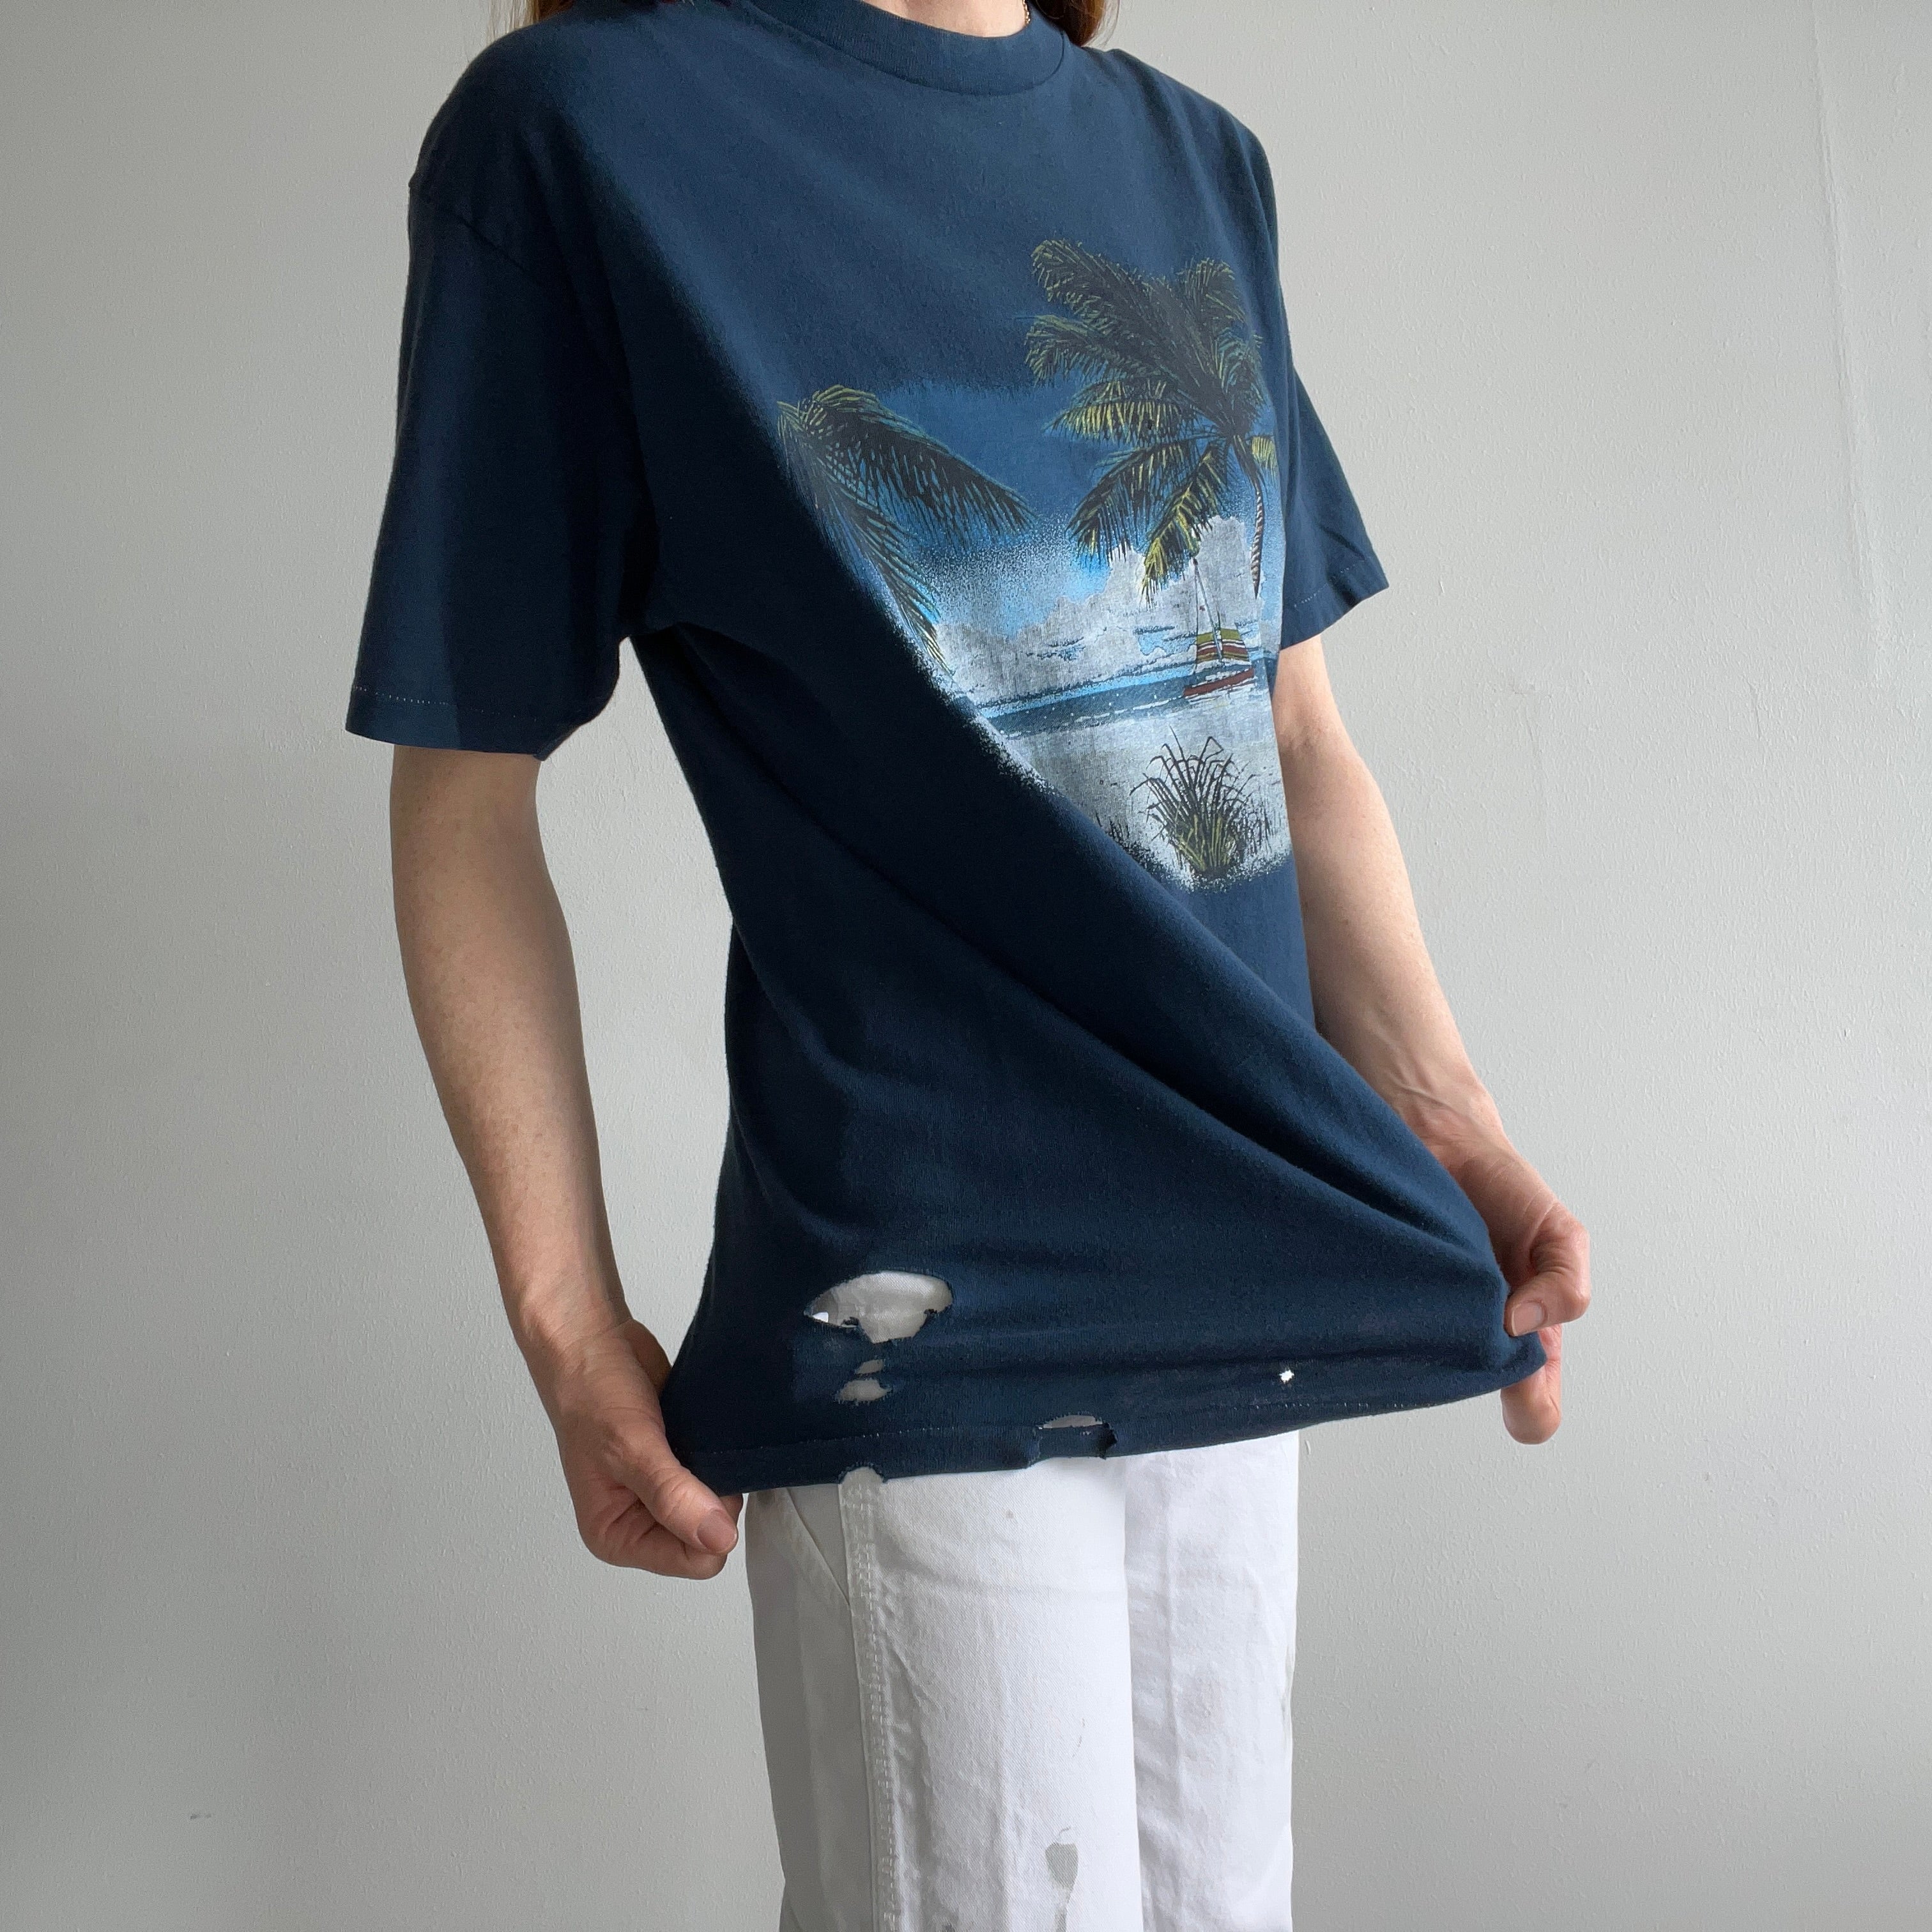 1980s Sailboat T-Shirt with Holes and Contrast Stitching